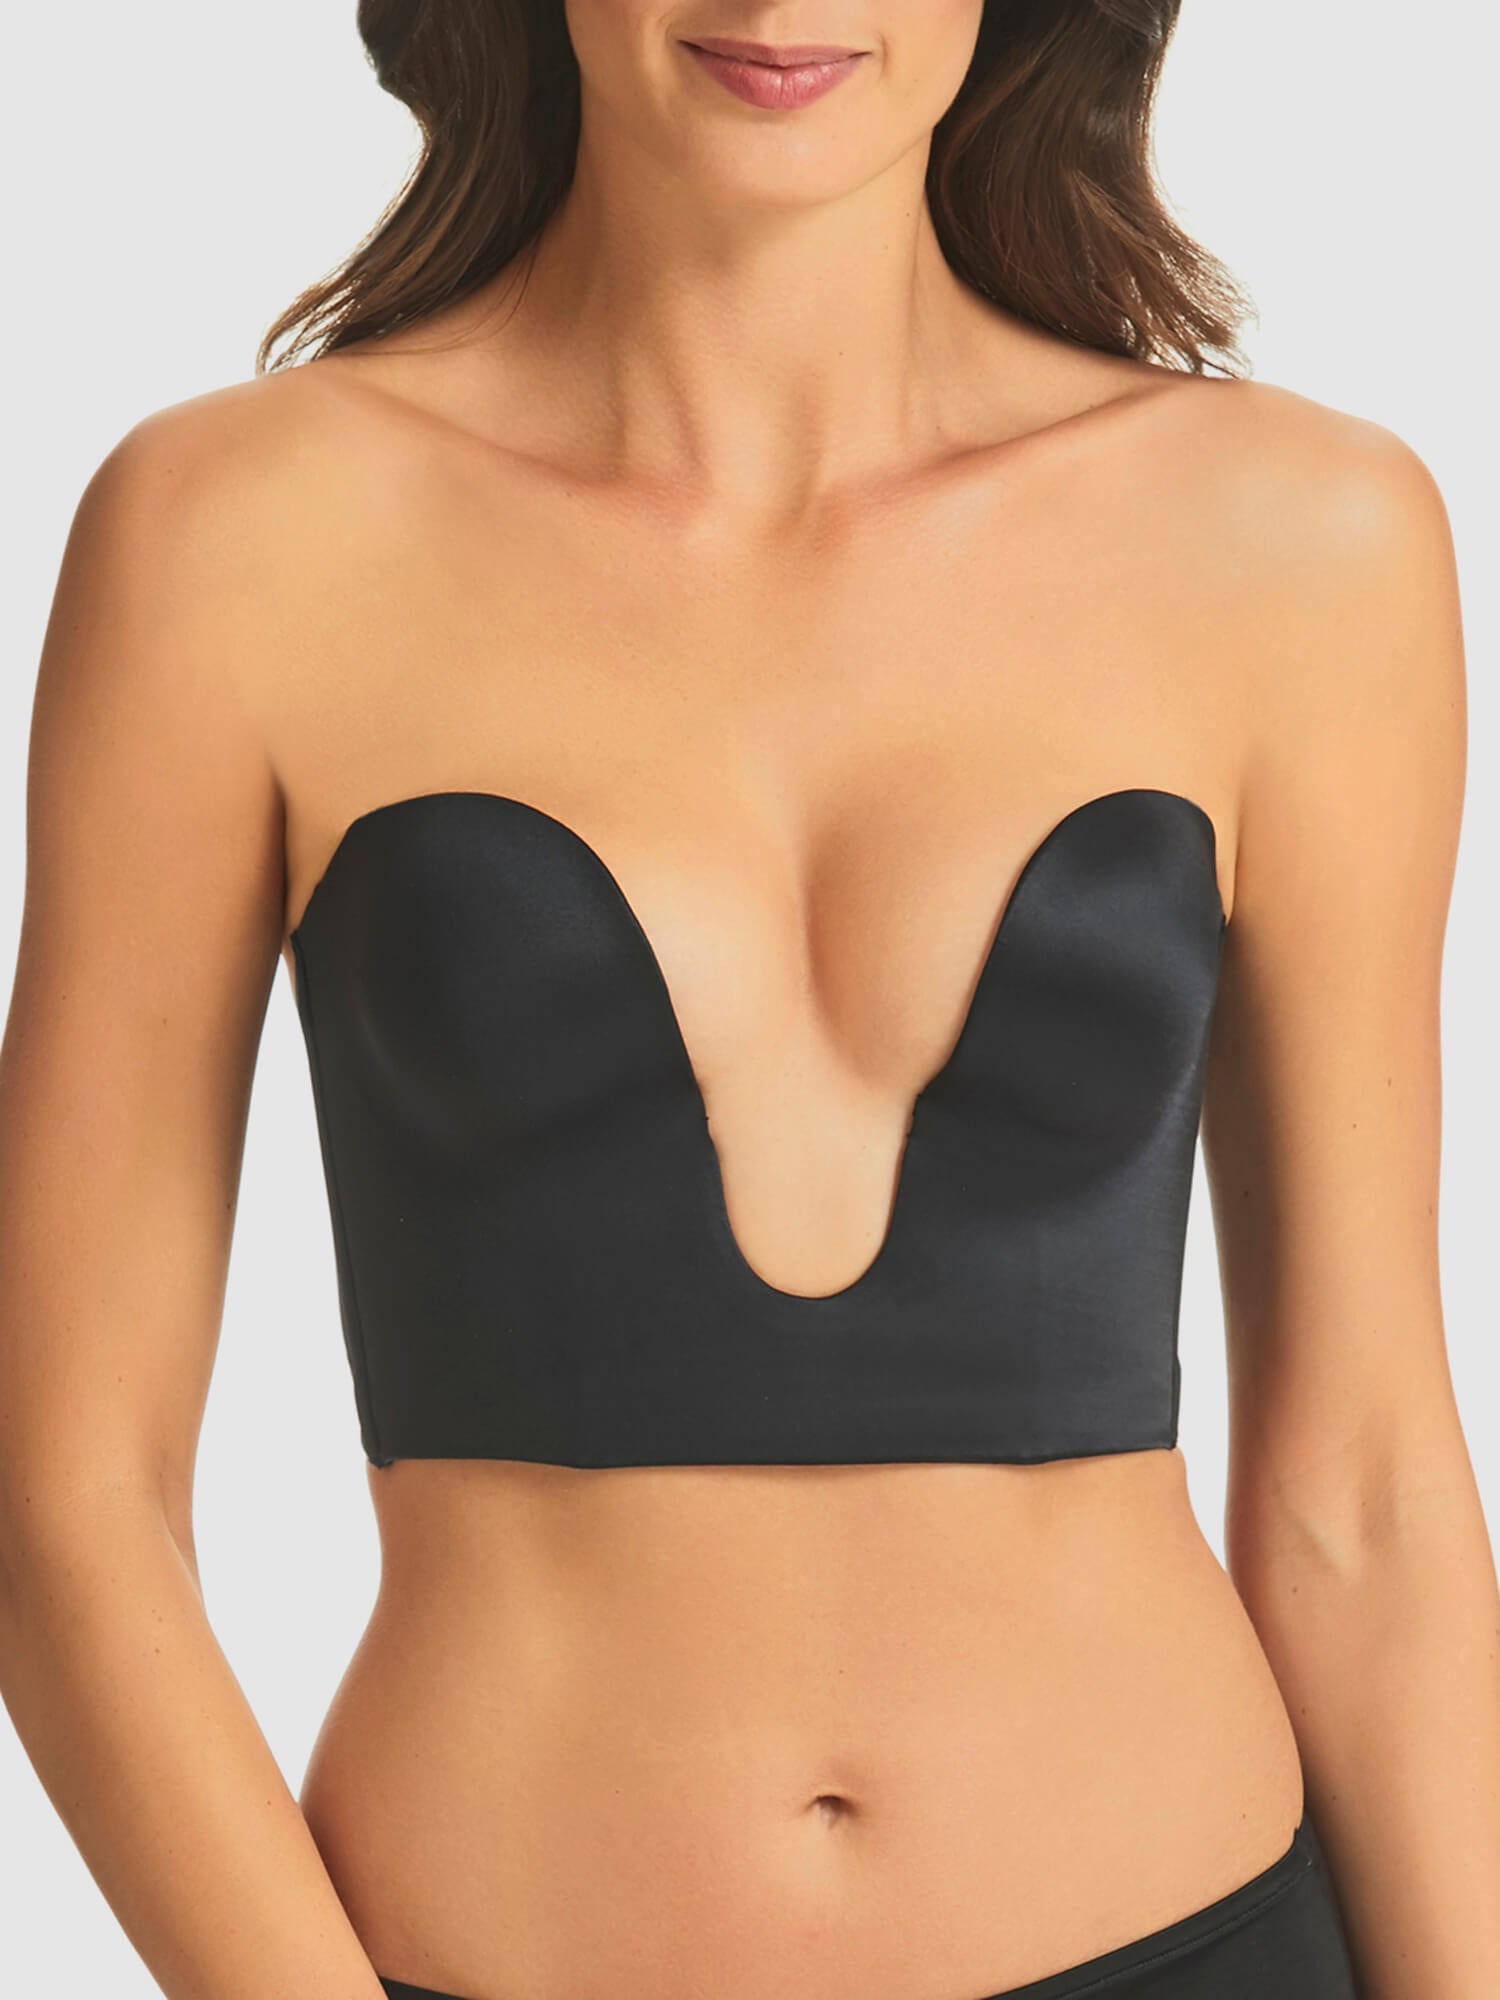 Which strapless bra is best for you? - Fine Lines Lingerie